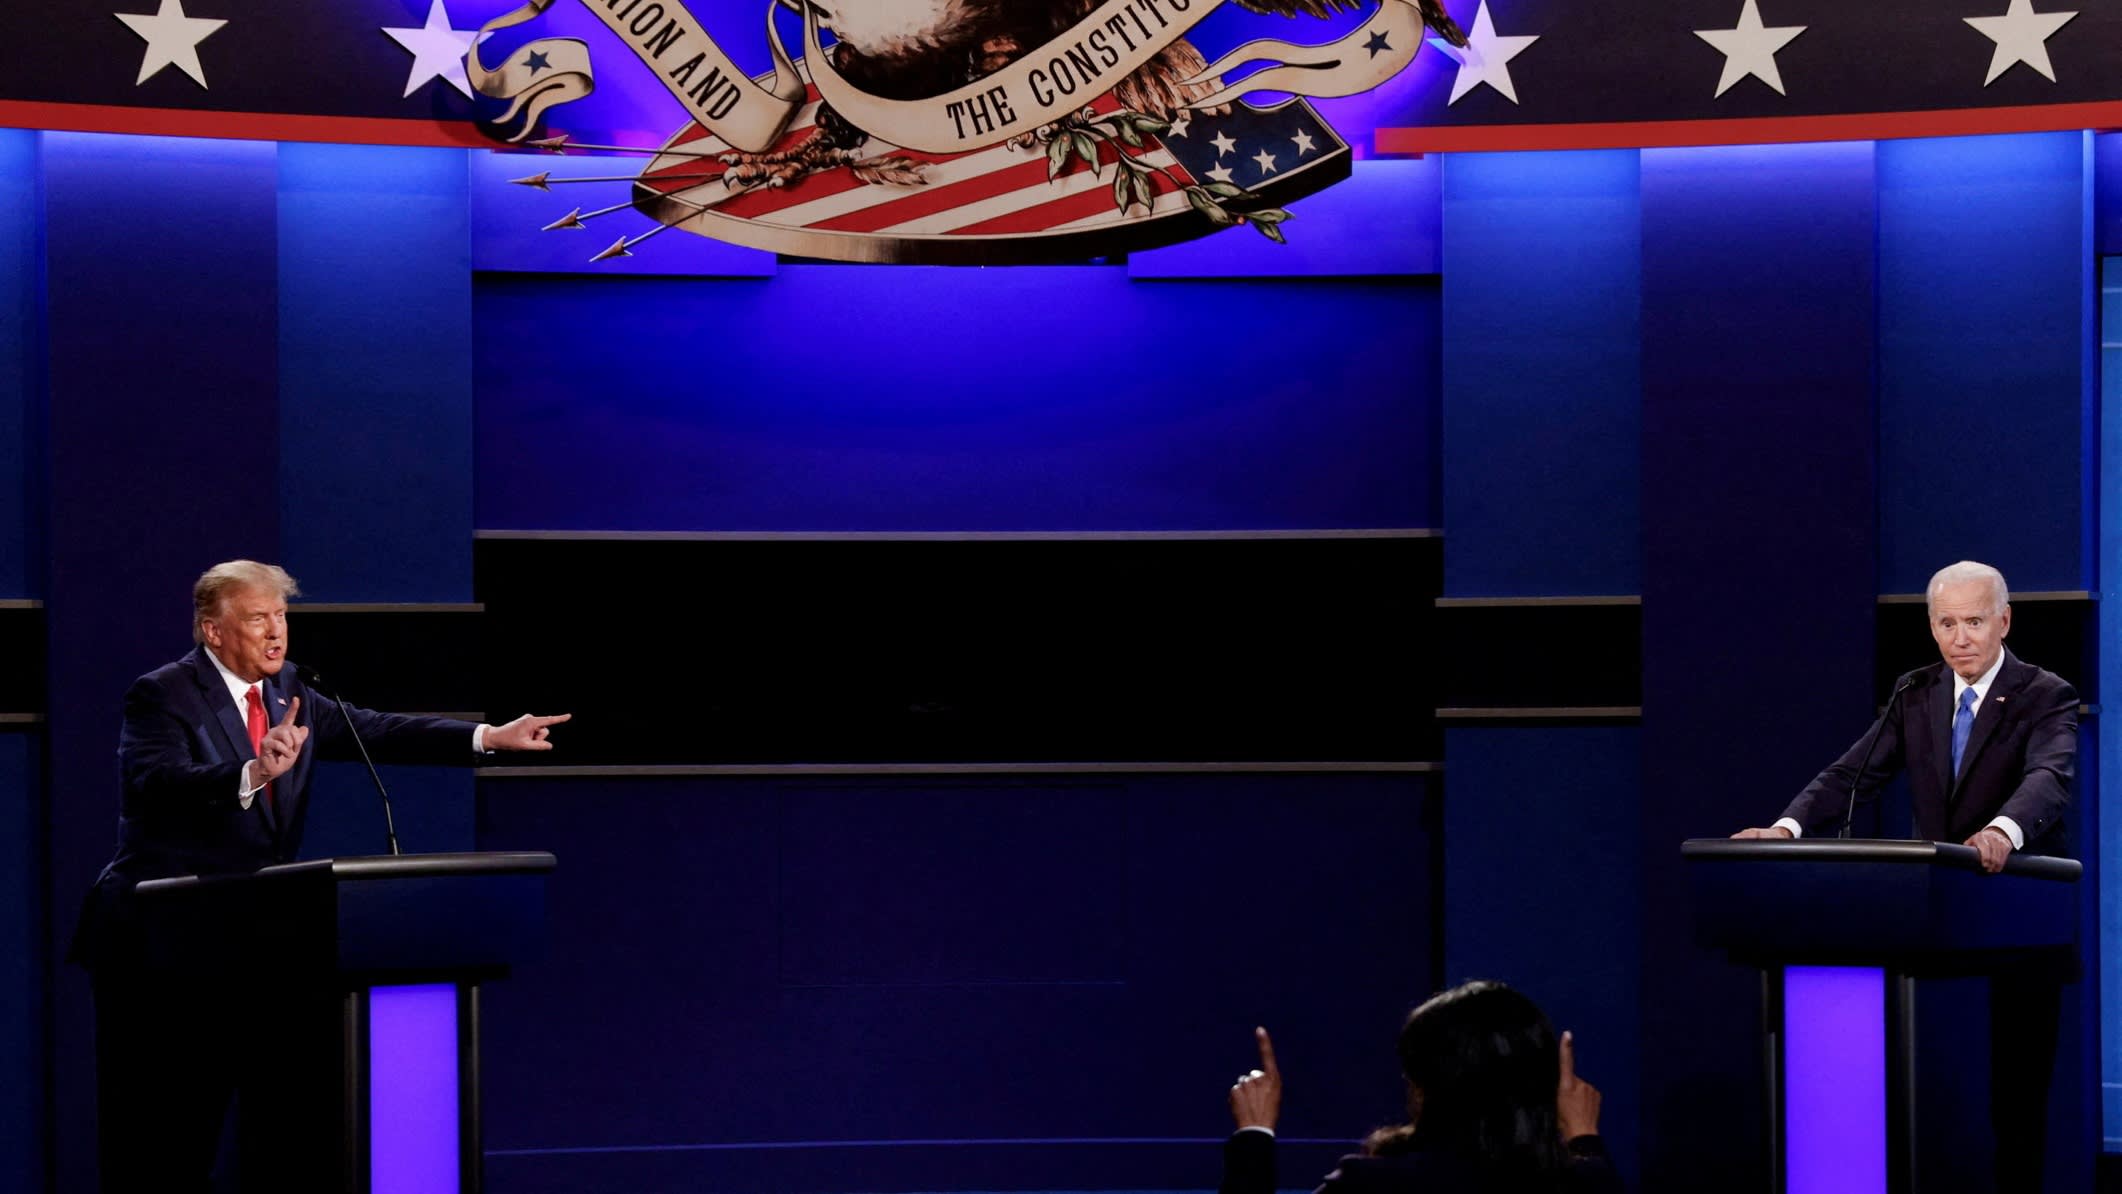 Donald Trump and Biden during their final 2020 debate in Nashville, Tennessee in October 2020.